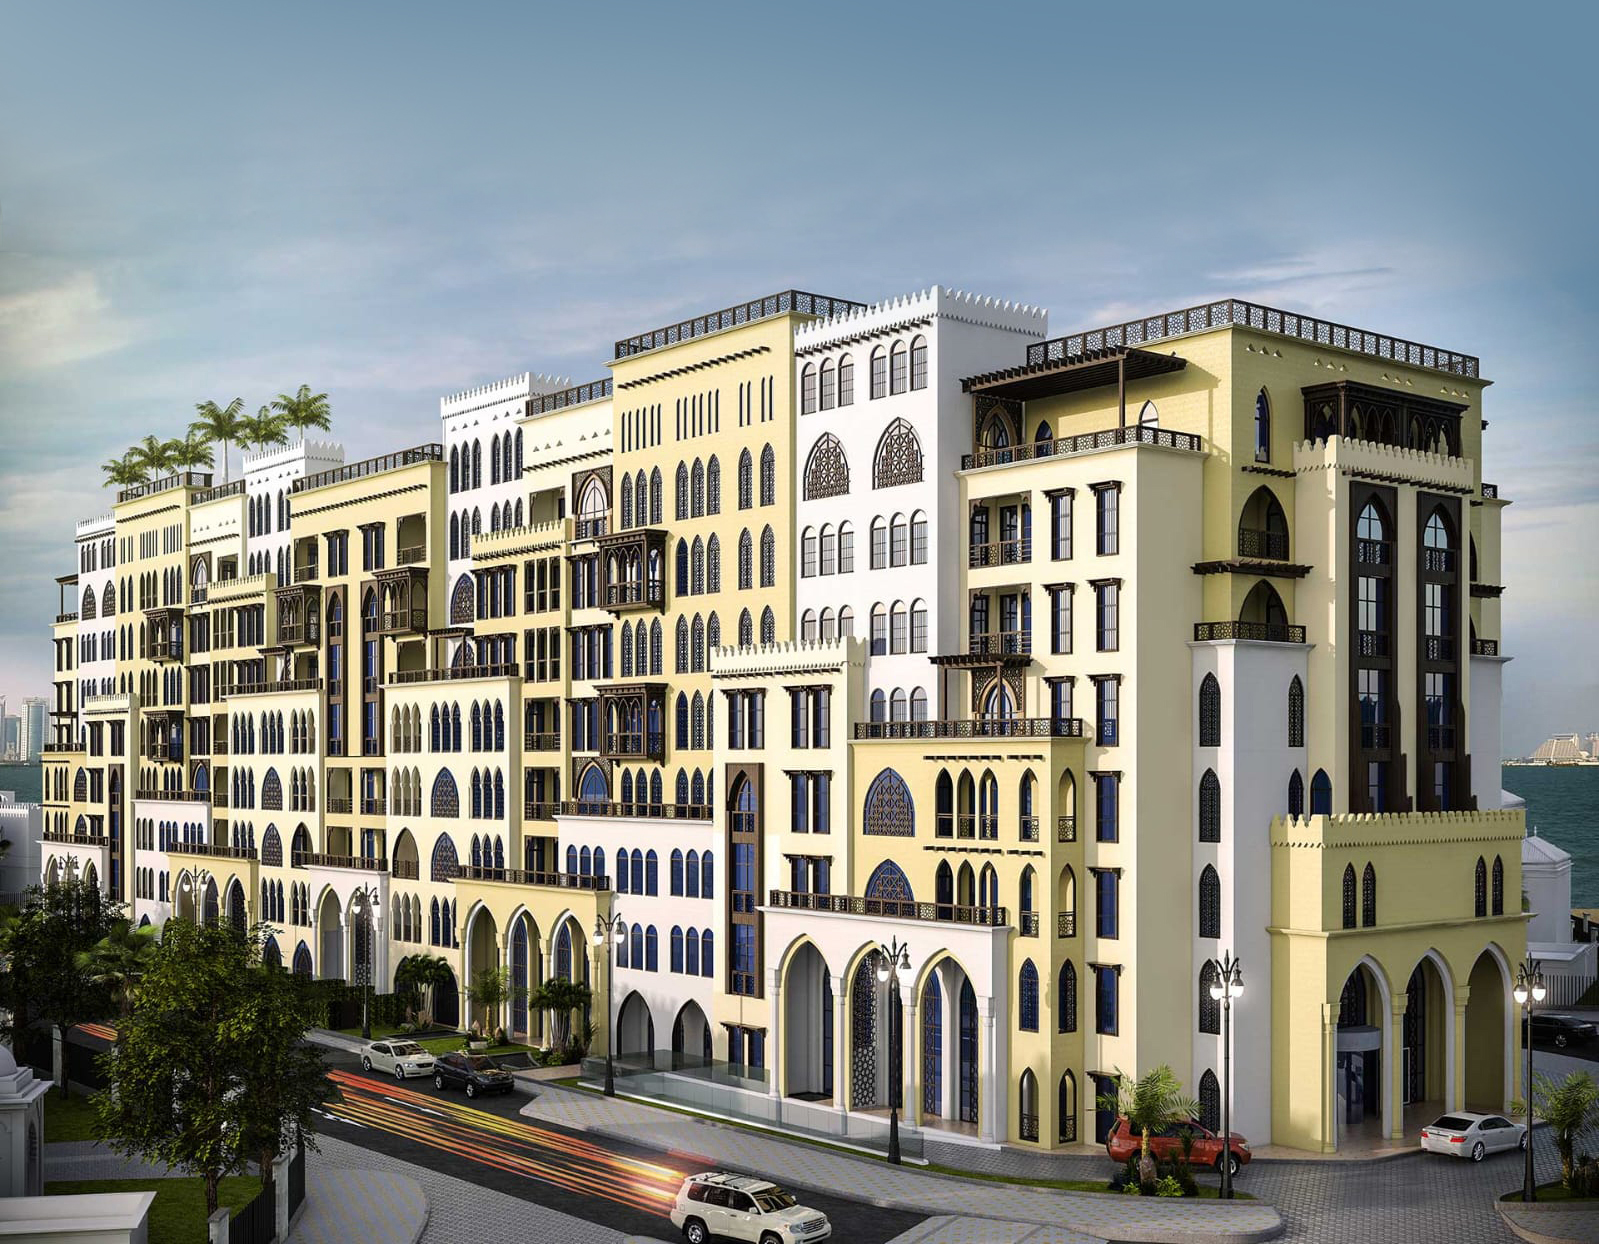 Design of a traditional-style residential block in Qatar, Doha, in 2021